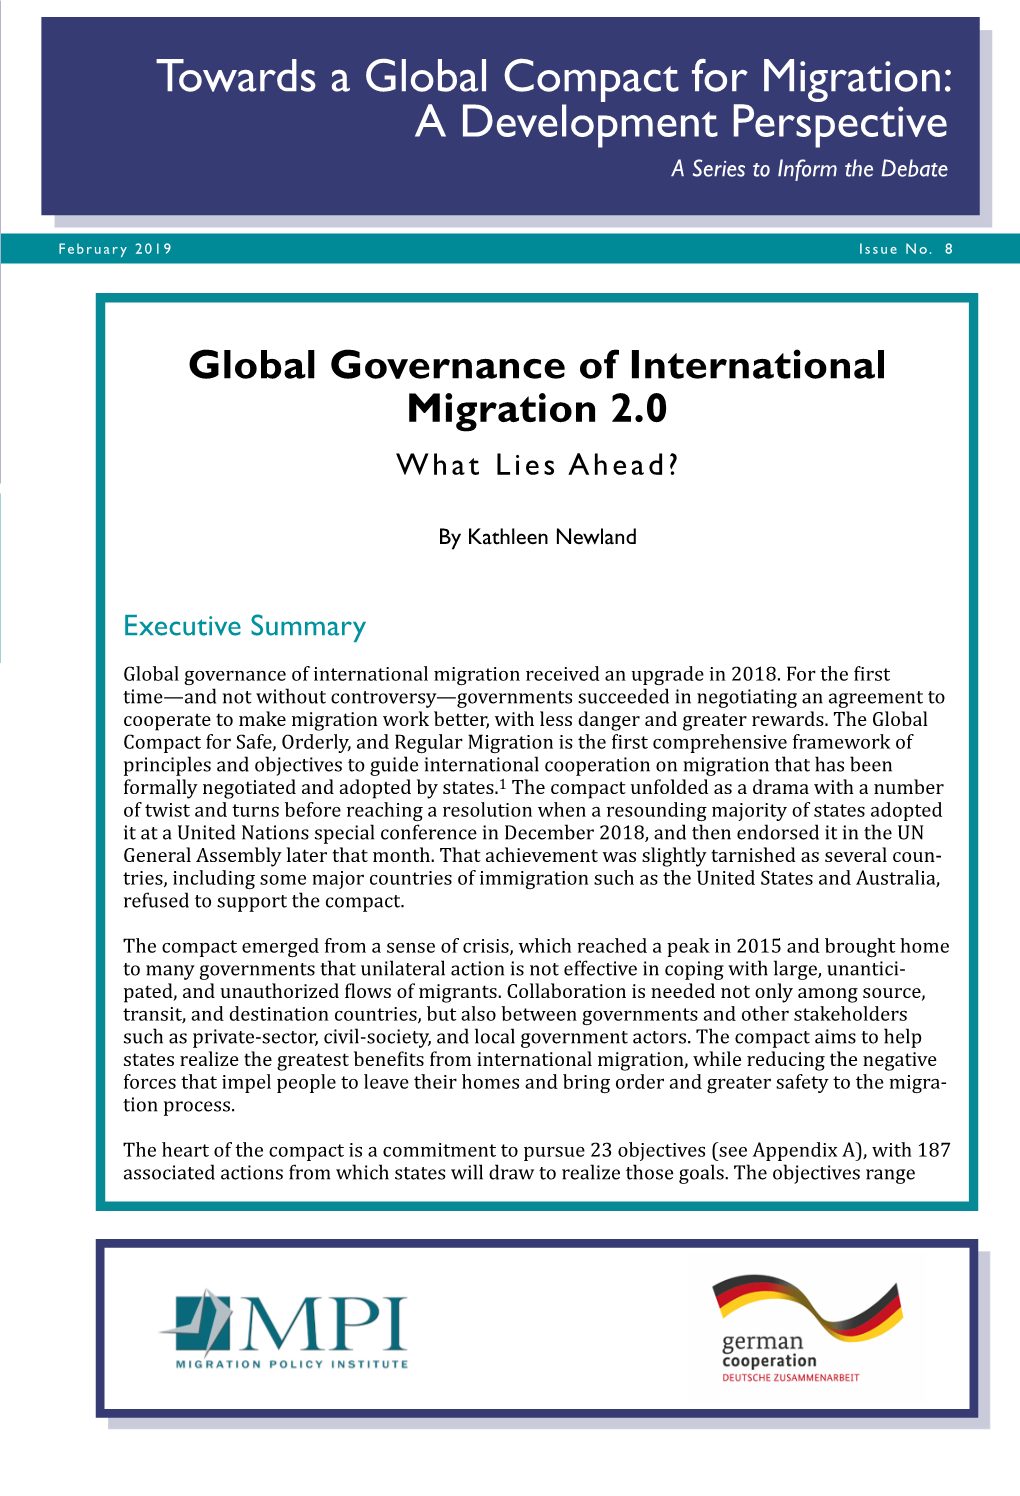 Global Governance of International Migration 2.0 What Lies Ahead?